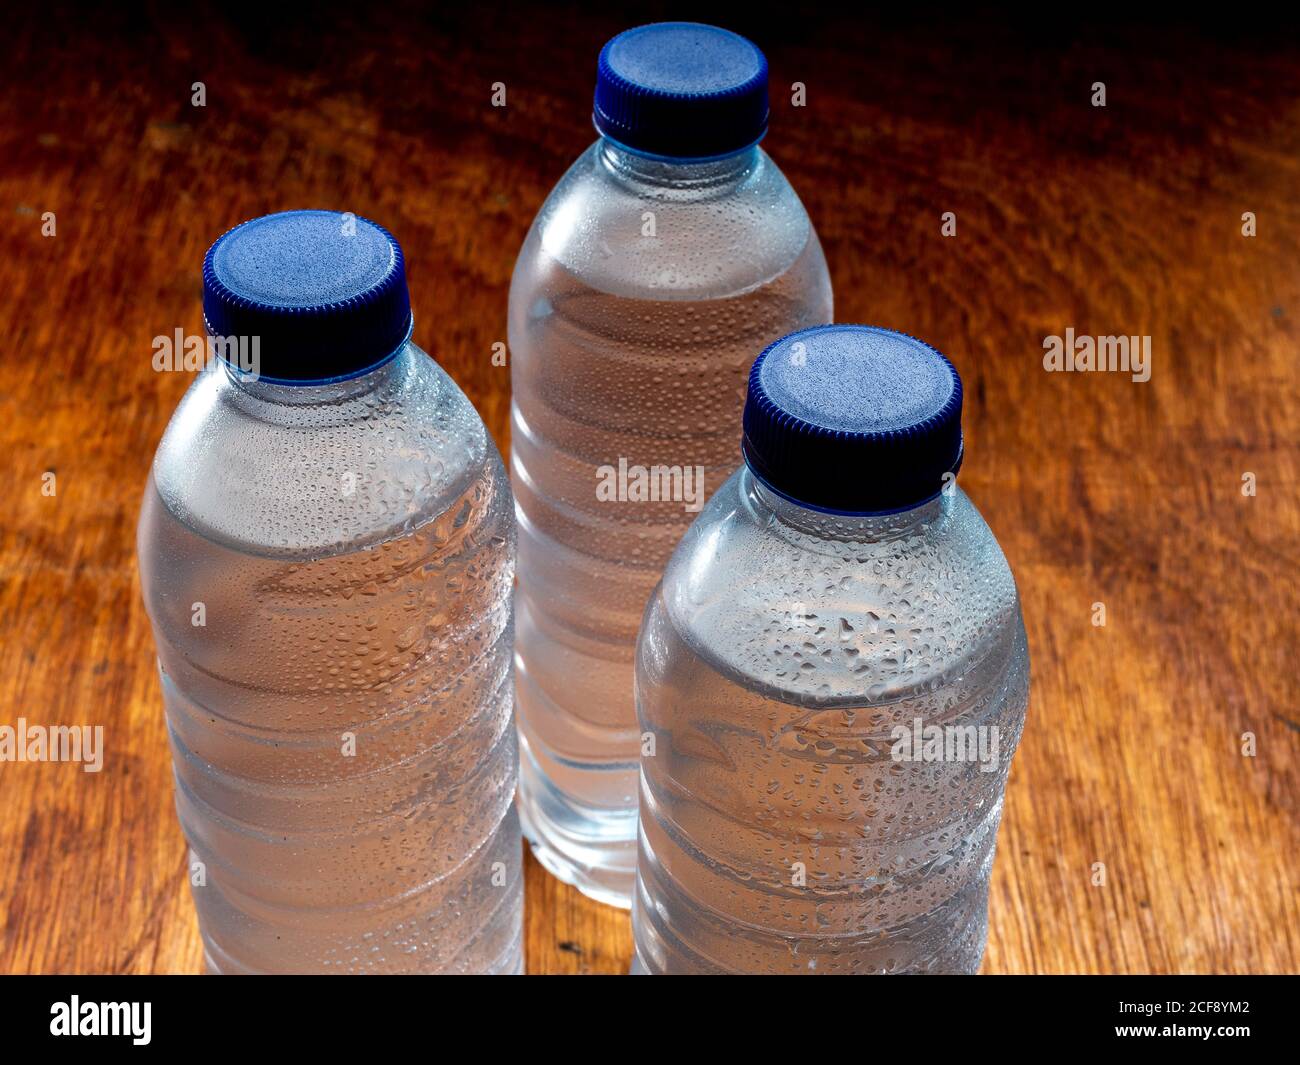 https://c8.alamy.com/comp/2CF8YM2/group-of-very-cold-water-bottles-with-blue-caps-and-water-drops-2CF8YM2.jpg